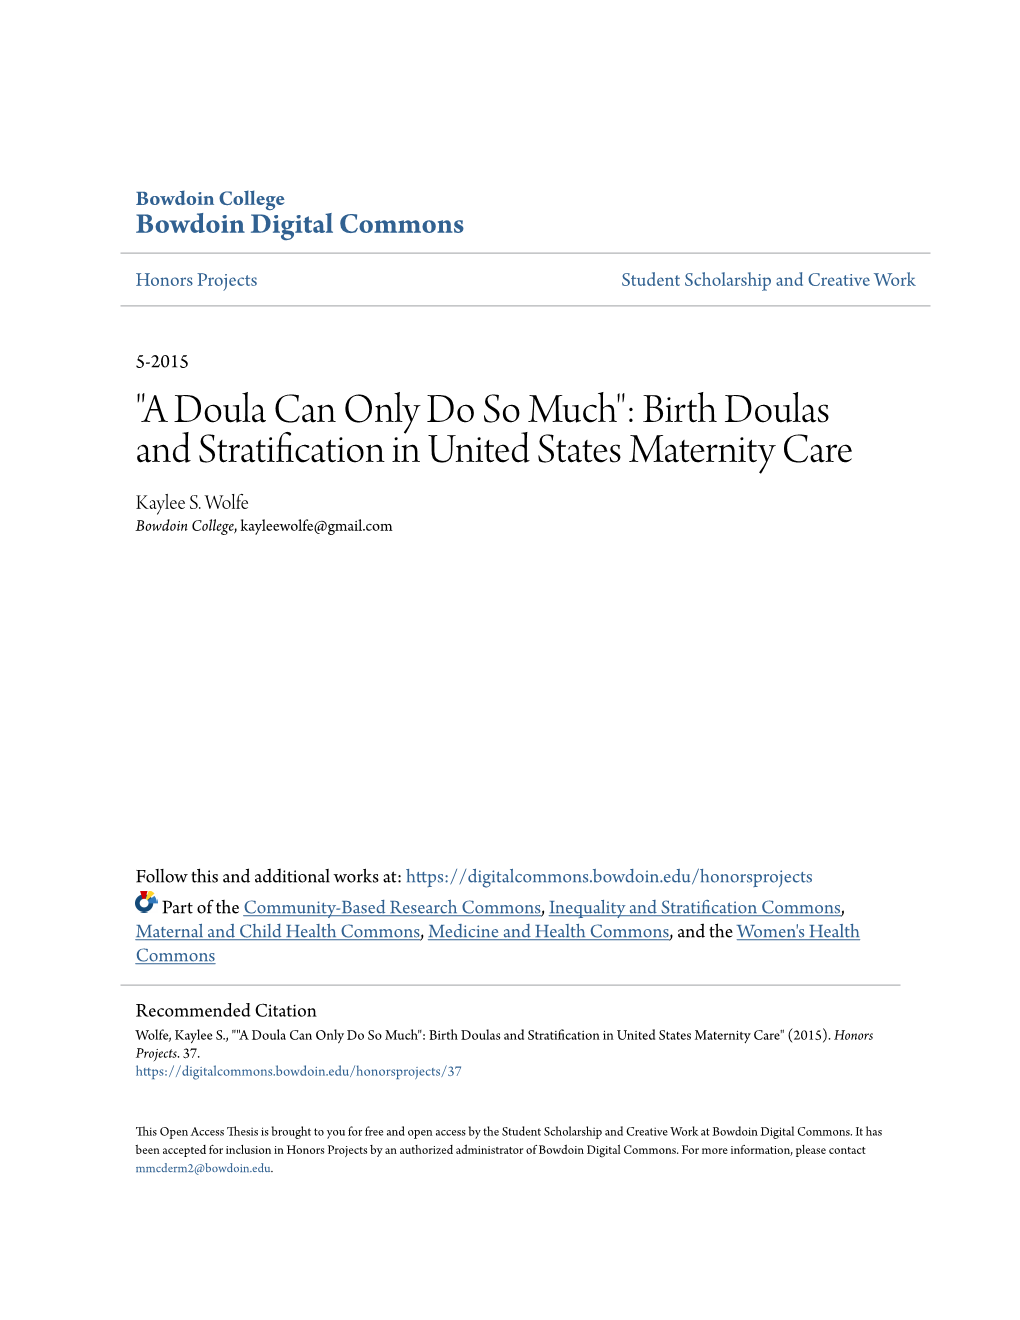 Birth Doulas and Stratification in United States Maternity Care Kaylee S